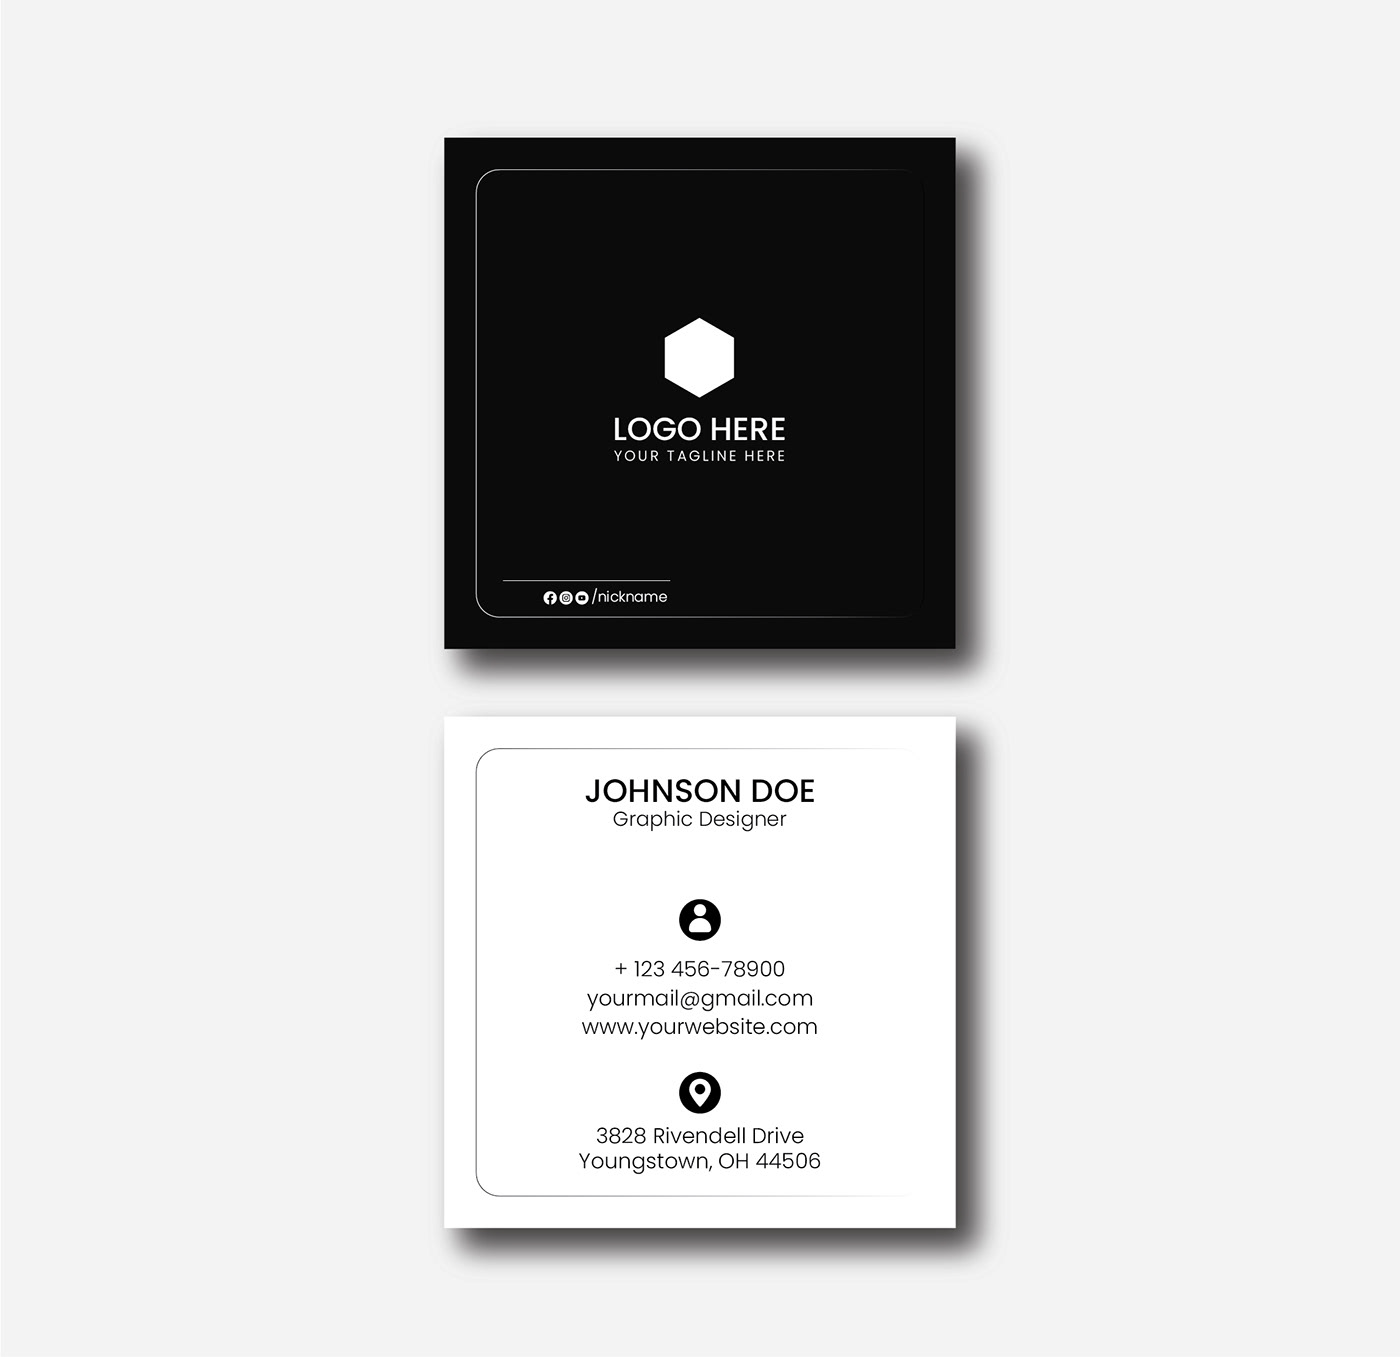 business card Business card design Square Business Card square business cards card design business Graphic Designer design square design graphic